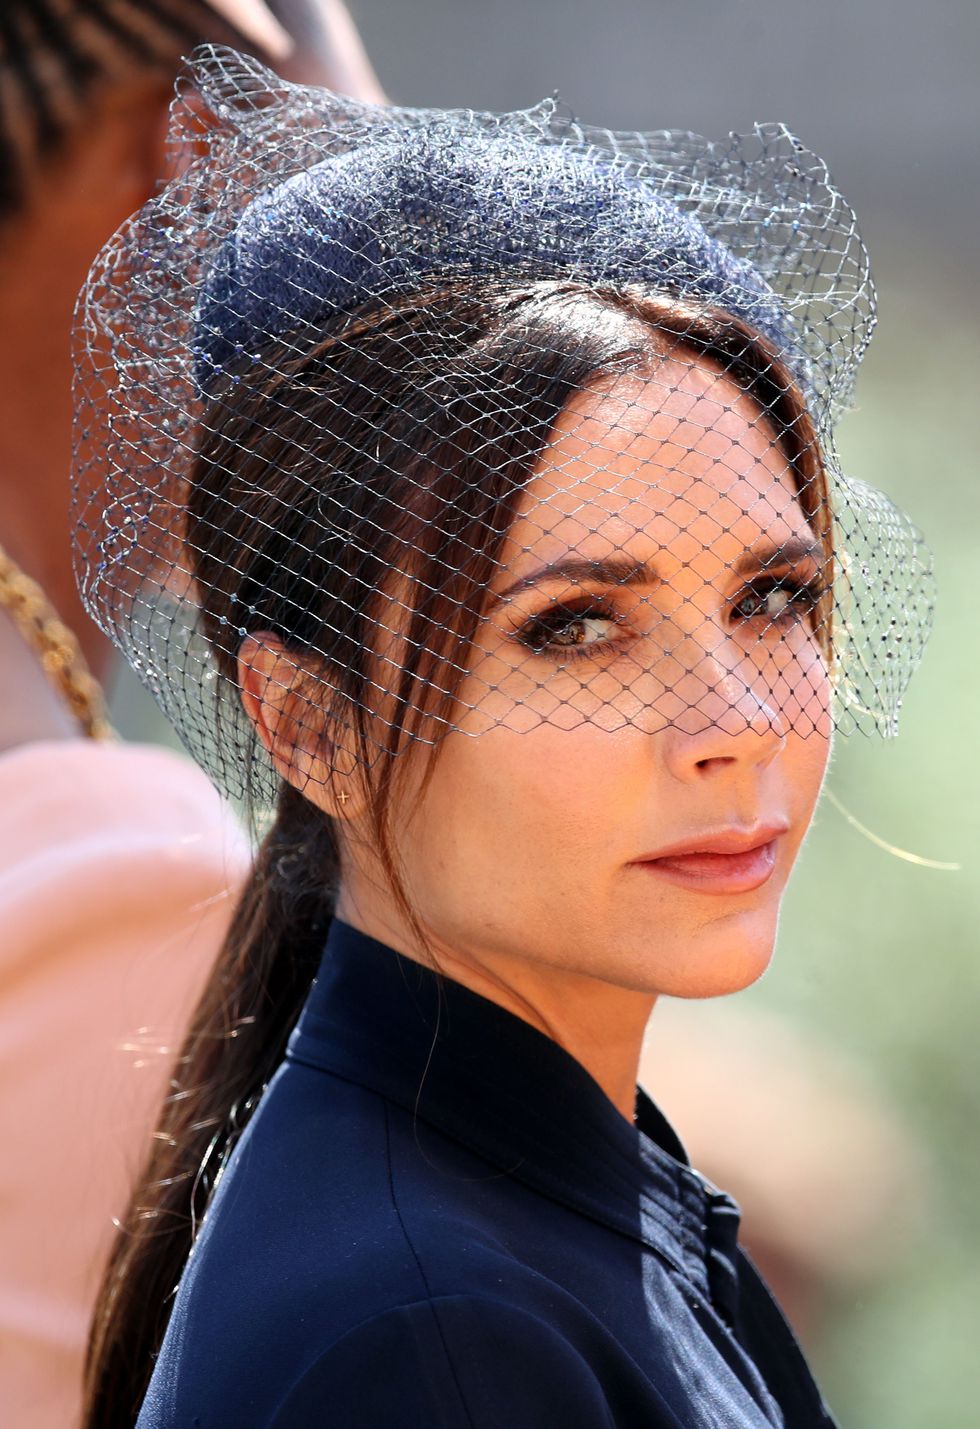 10 Most Memorable Royal Wedding Hats You Want To Add to ...